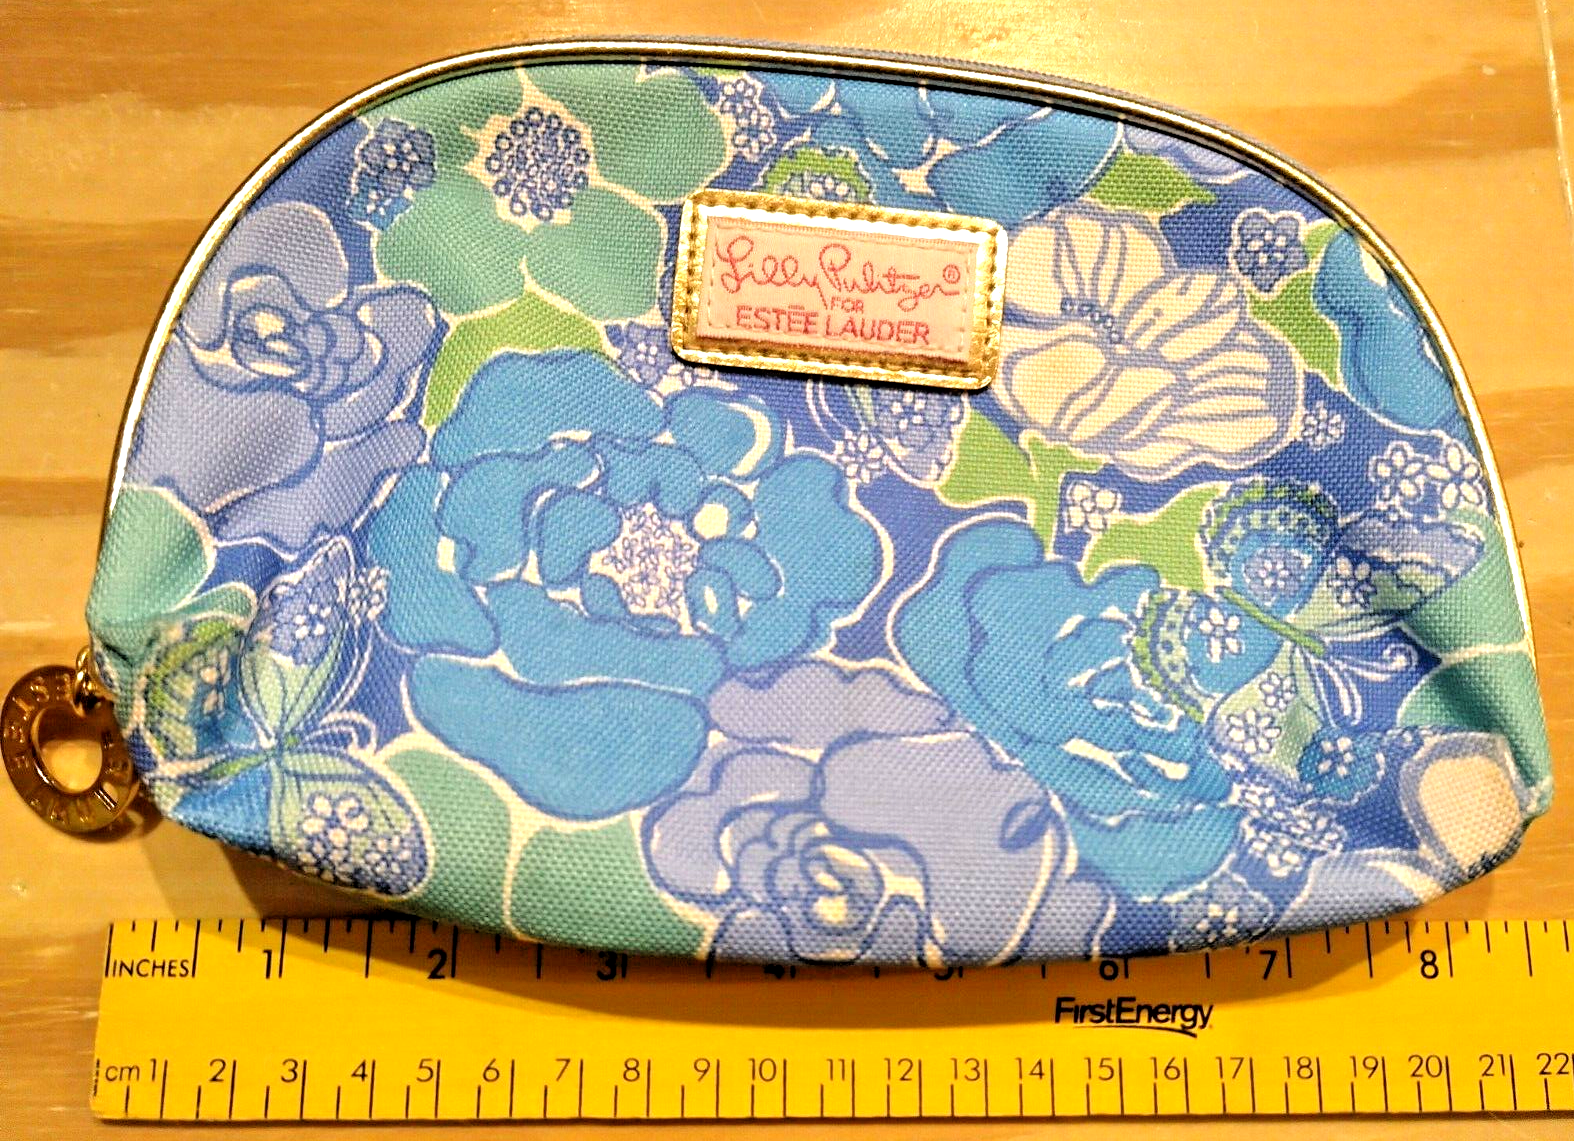 Lilly Pulitzer for Estee Lauder Turquoise Butterfly Small Cosmetic Case - $15.91